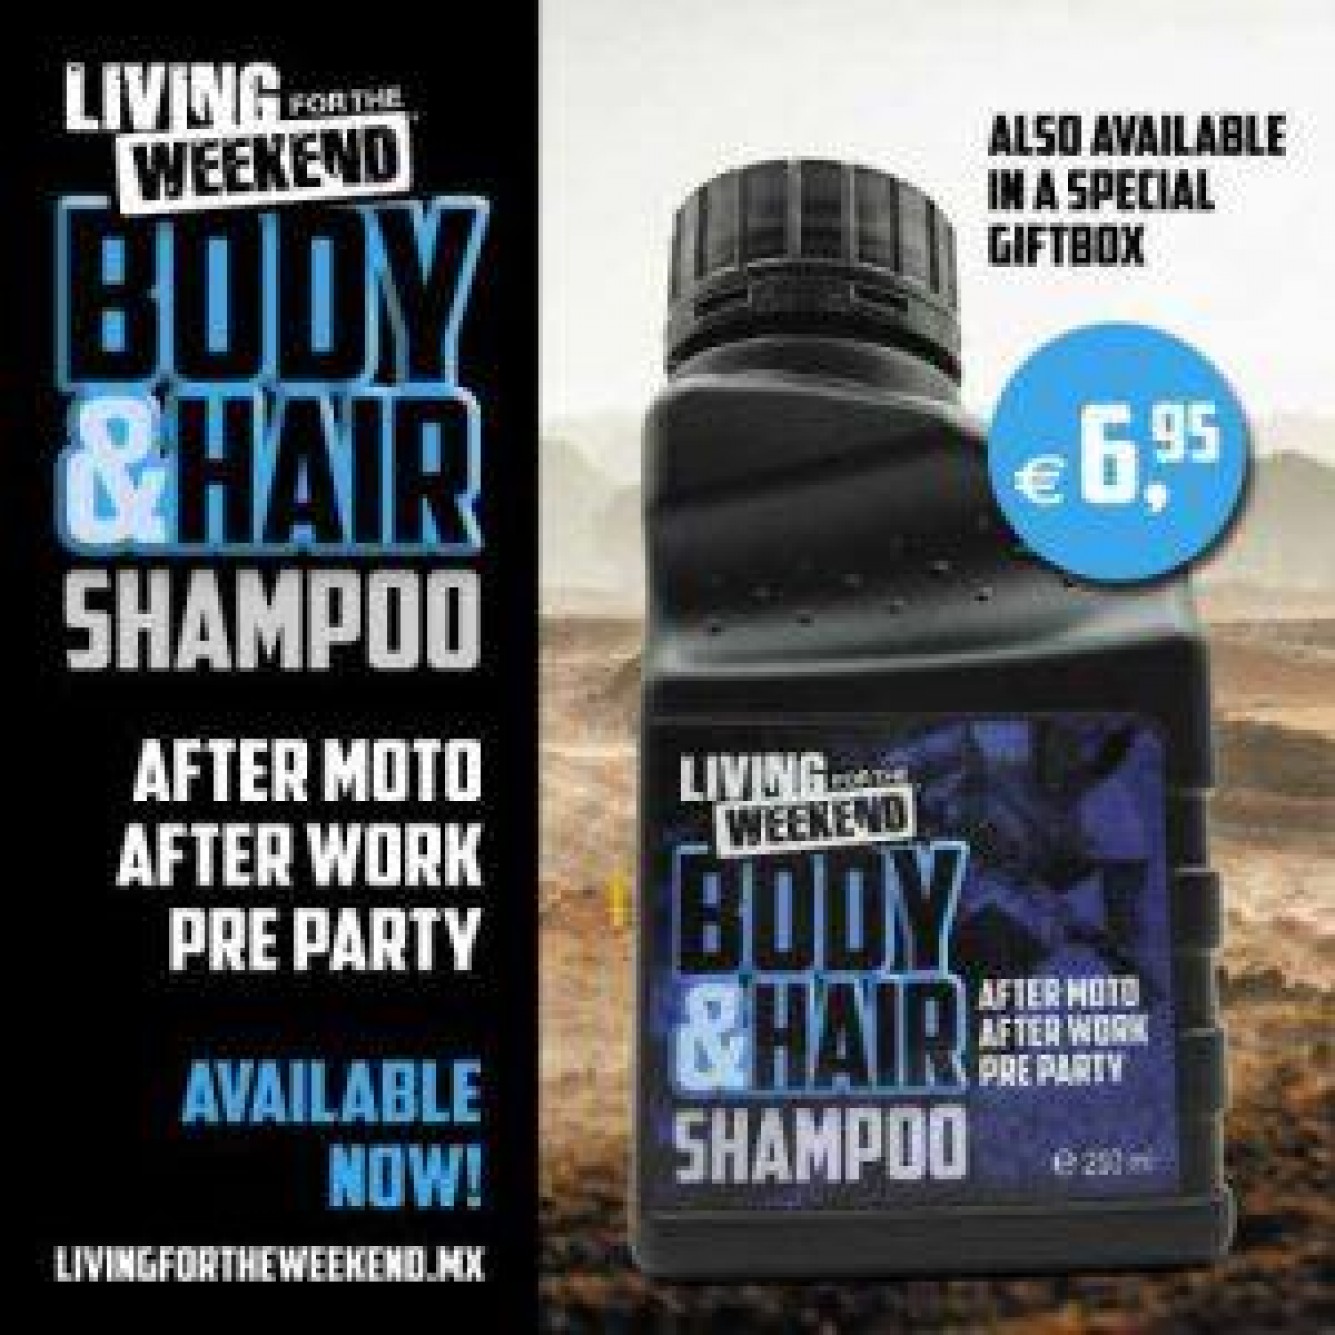 Living For The Weekend | Body & Hair Shampoo